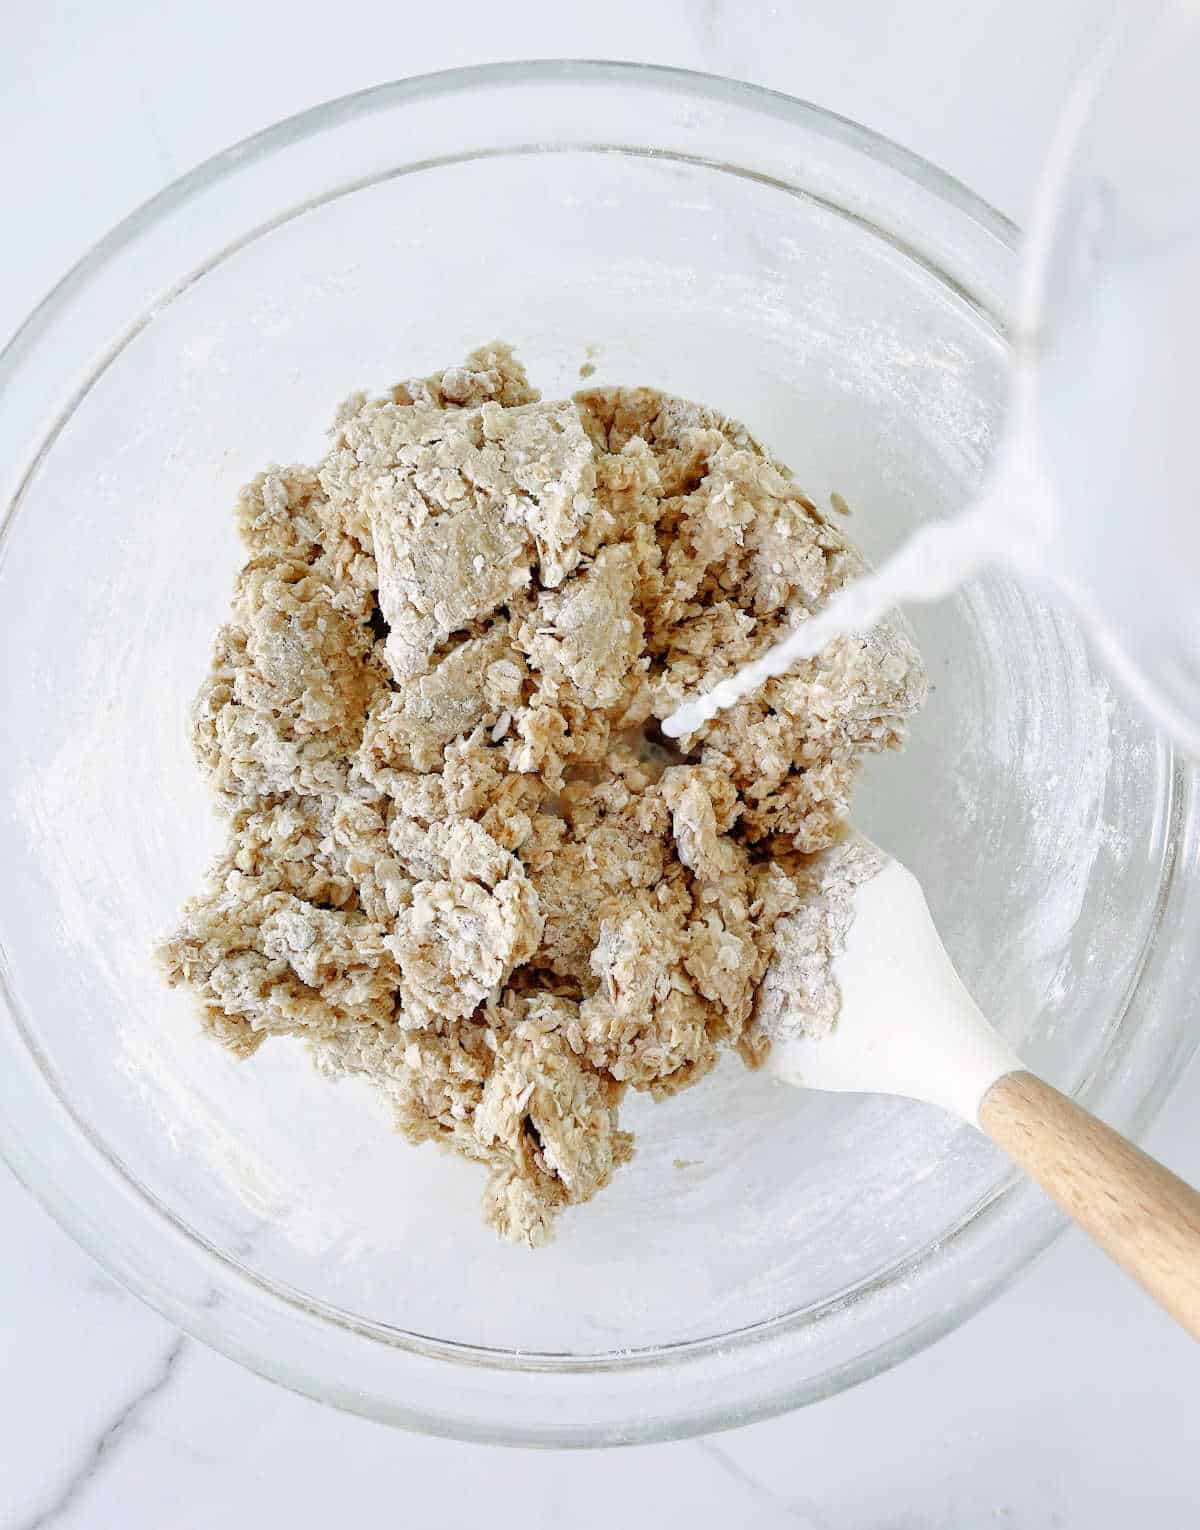 Milk being poured over oatmeal cookie mixture in a glass bowl. A white wooden spatula.